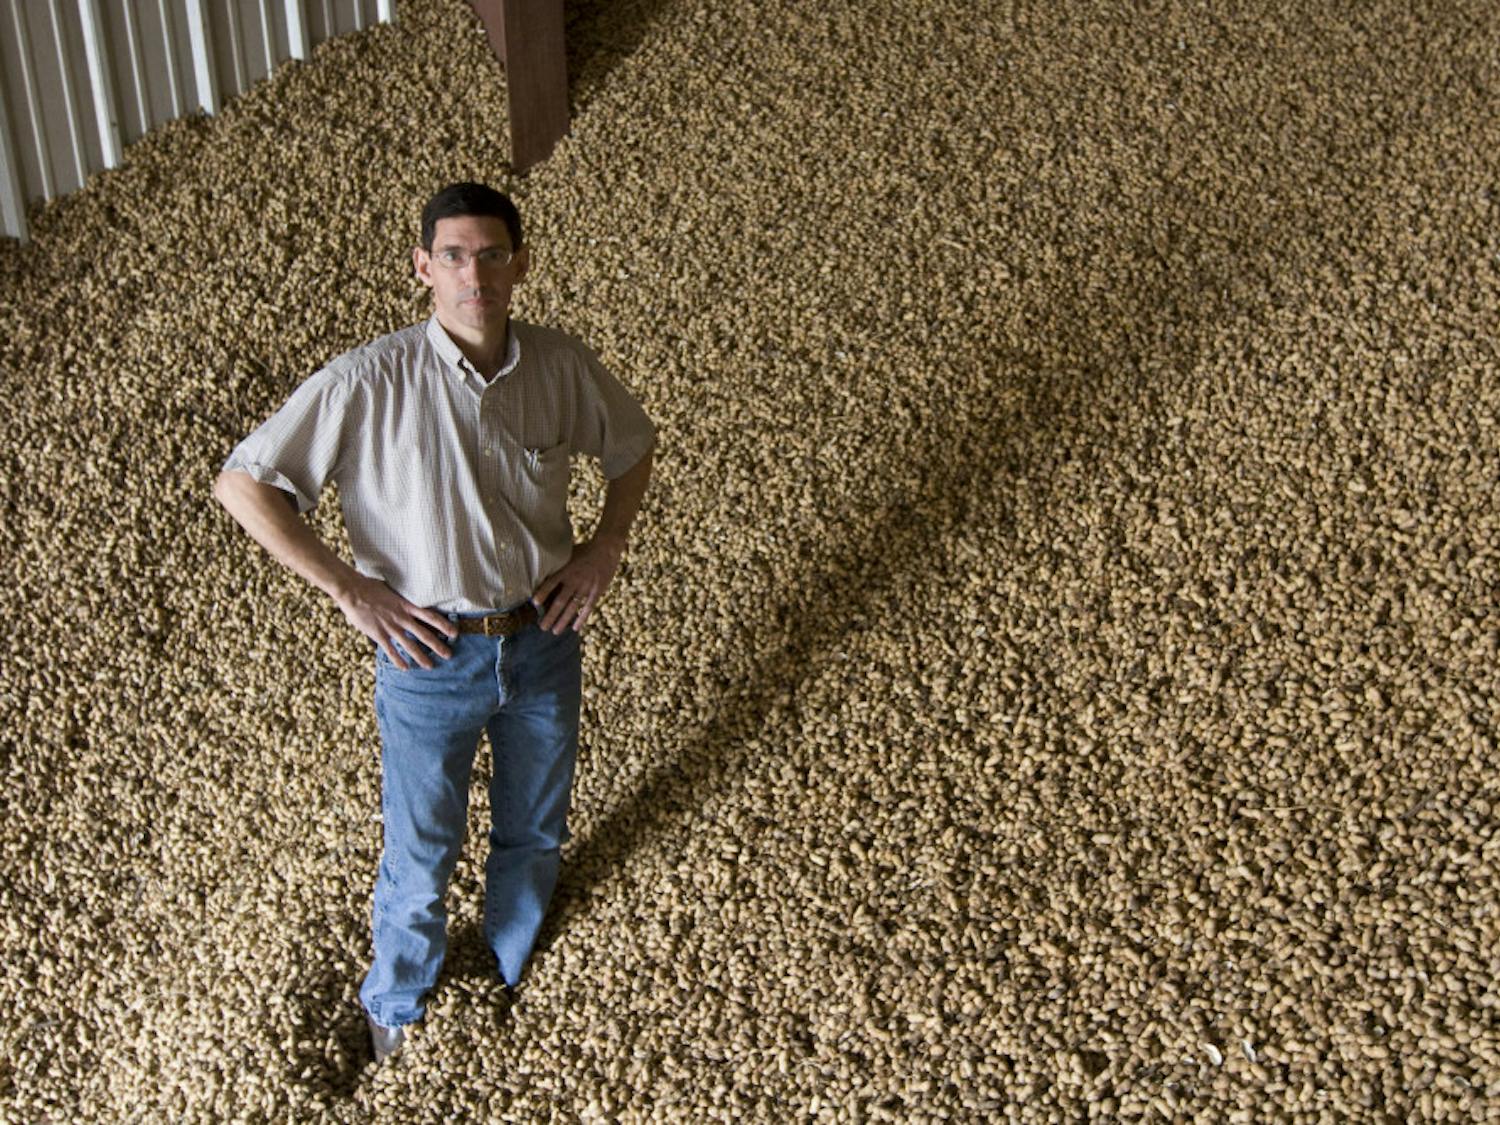 Agronomist Barry Tillman stands in peanuts. “The techniques that we develop could be utilized by others to build on for future improvements,” he said.